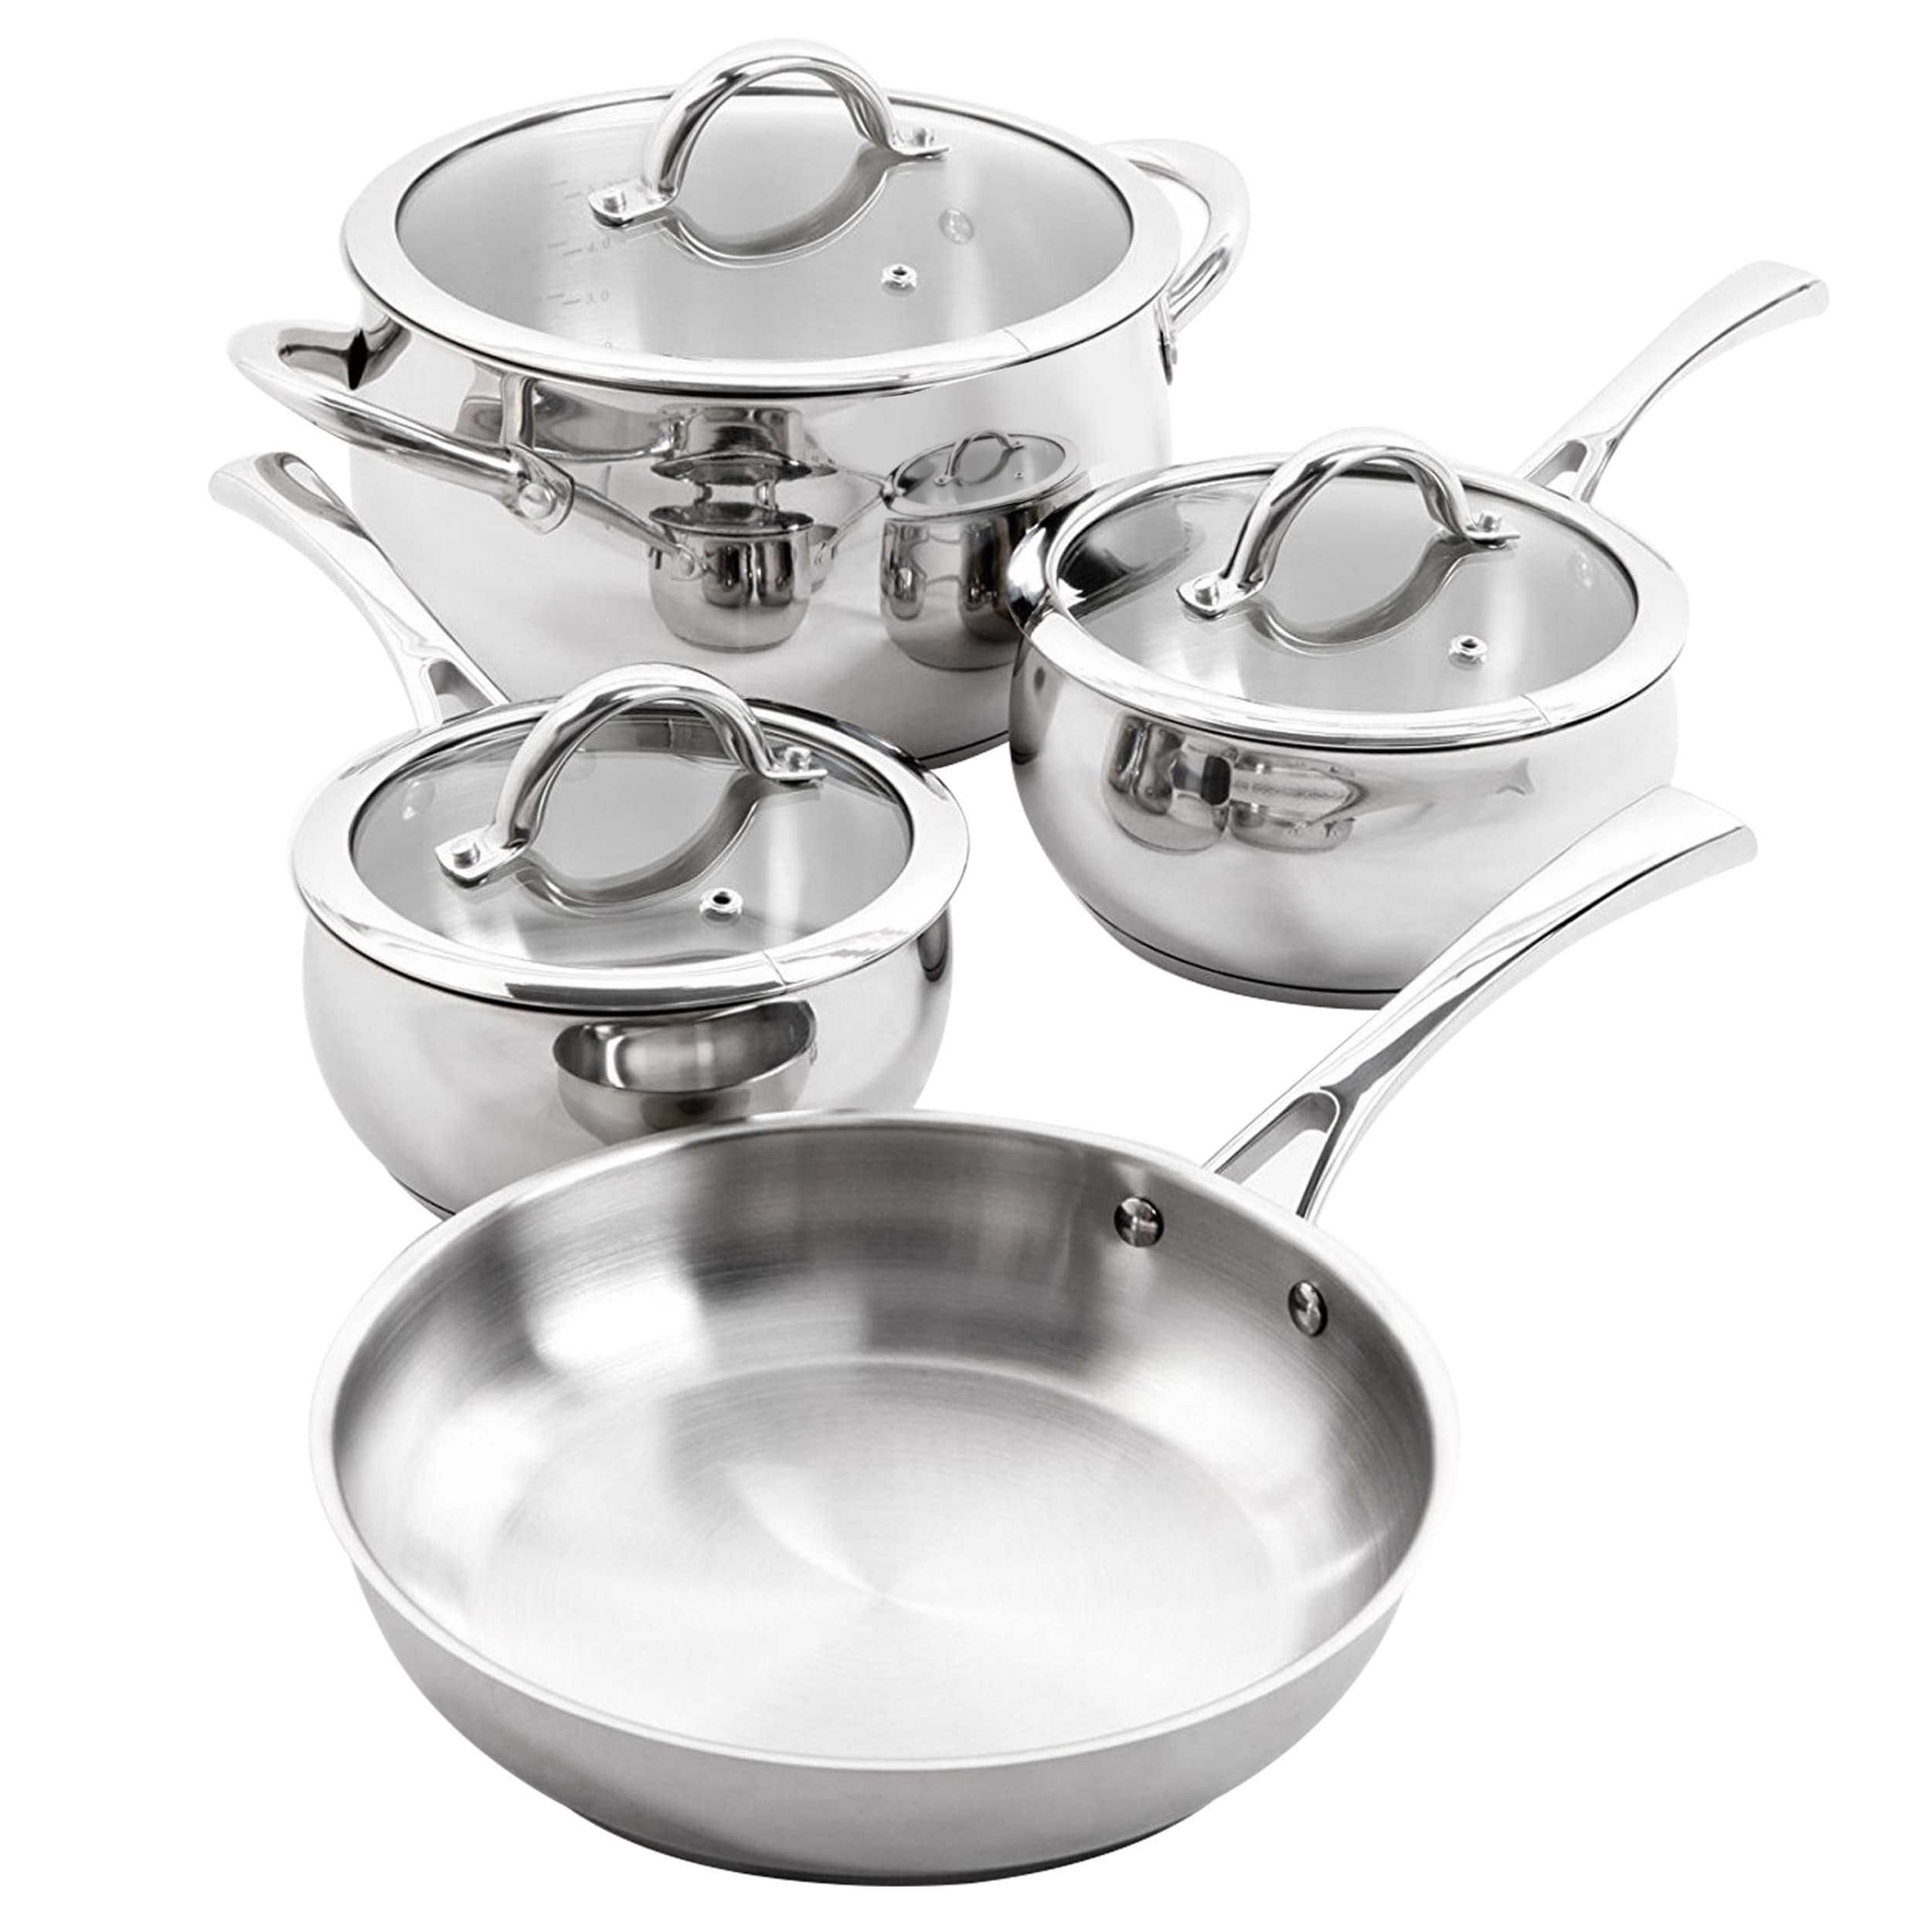 https://ak1.ostkcdn.com/images/products/is/images/direct/9db5926bd38b77a481b94b64165f746ccce72a10/Oster-7-Piece-Brushed-Stainless-Steel-Cookware-Set.jpg